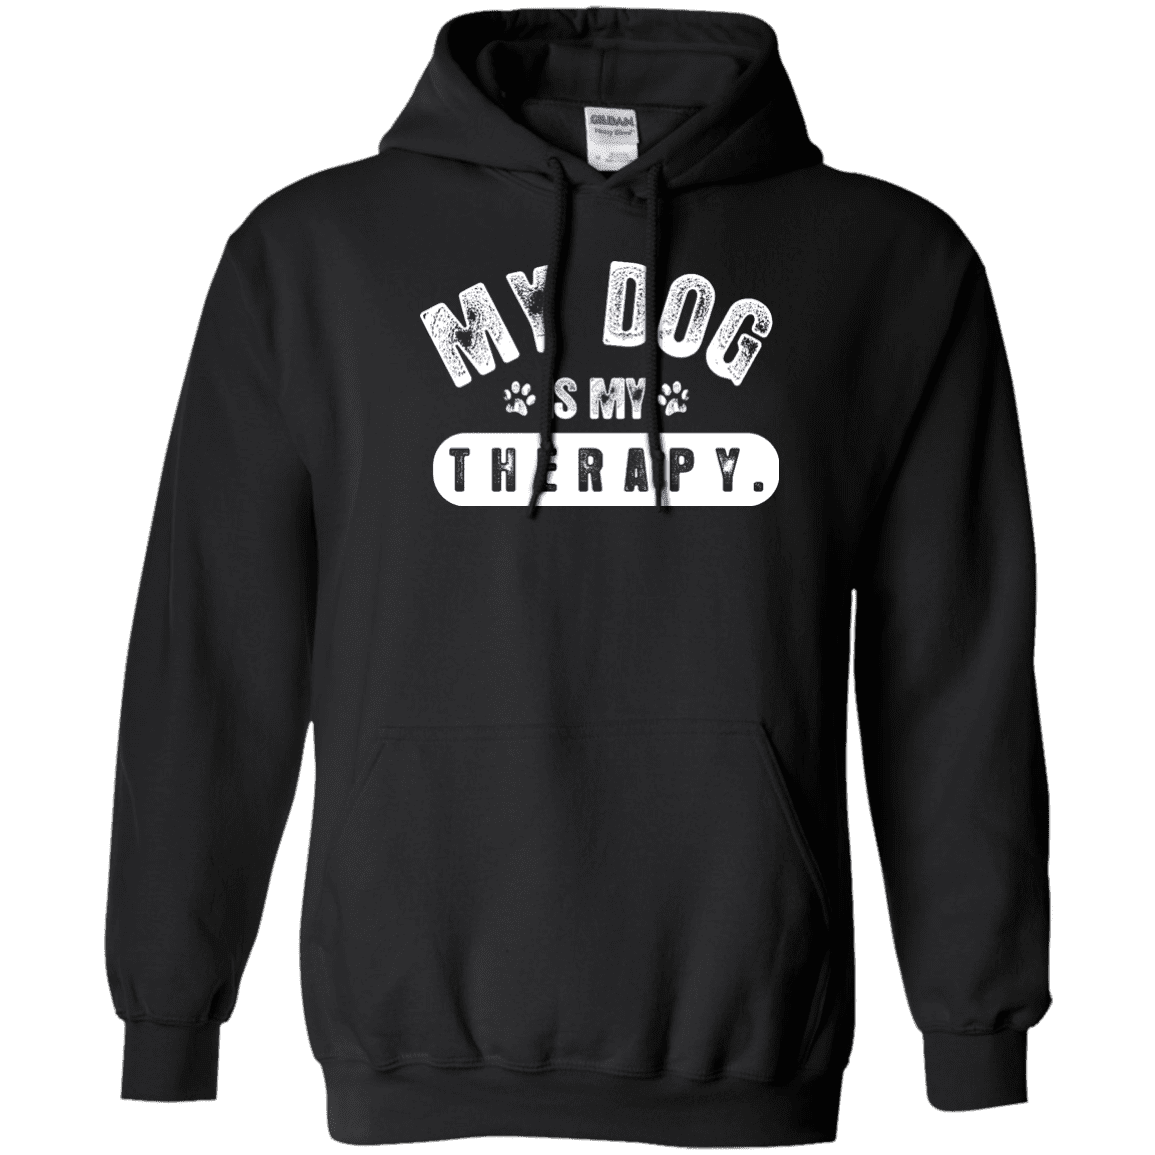 My Dog Is My Therapy - Hoodie.